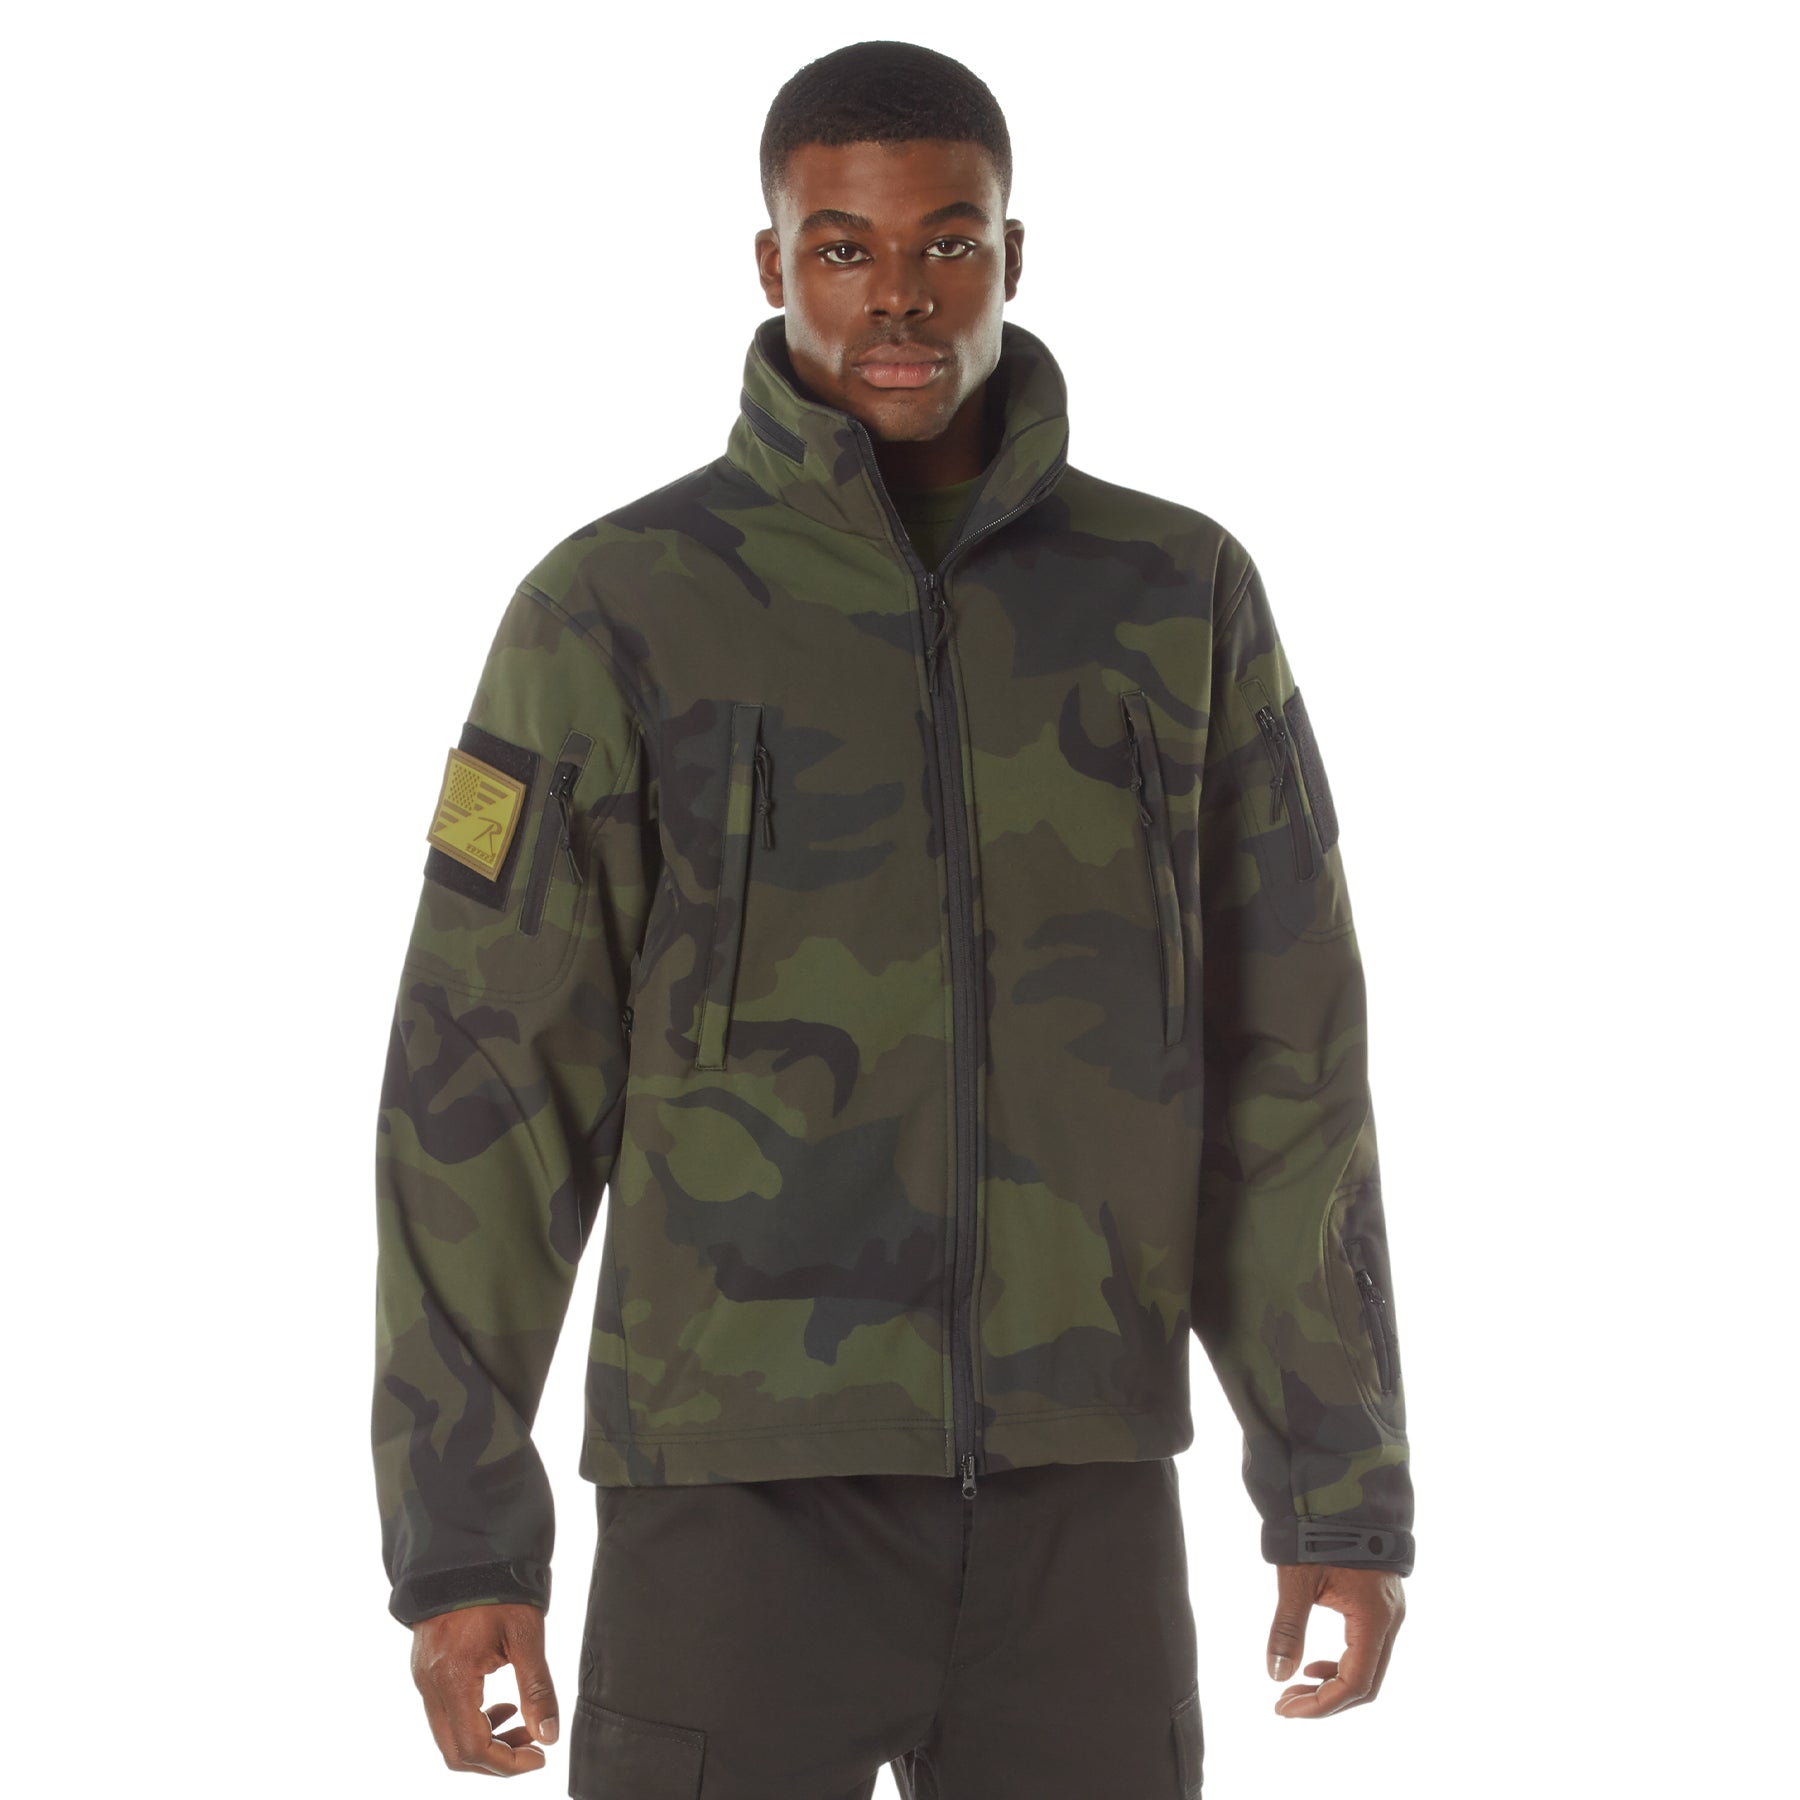 Poly Camo Spec Ops Tactical Soft Shell Jackets